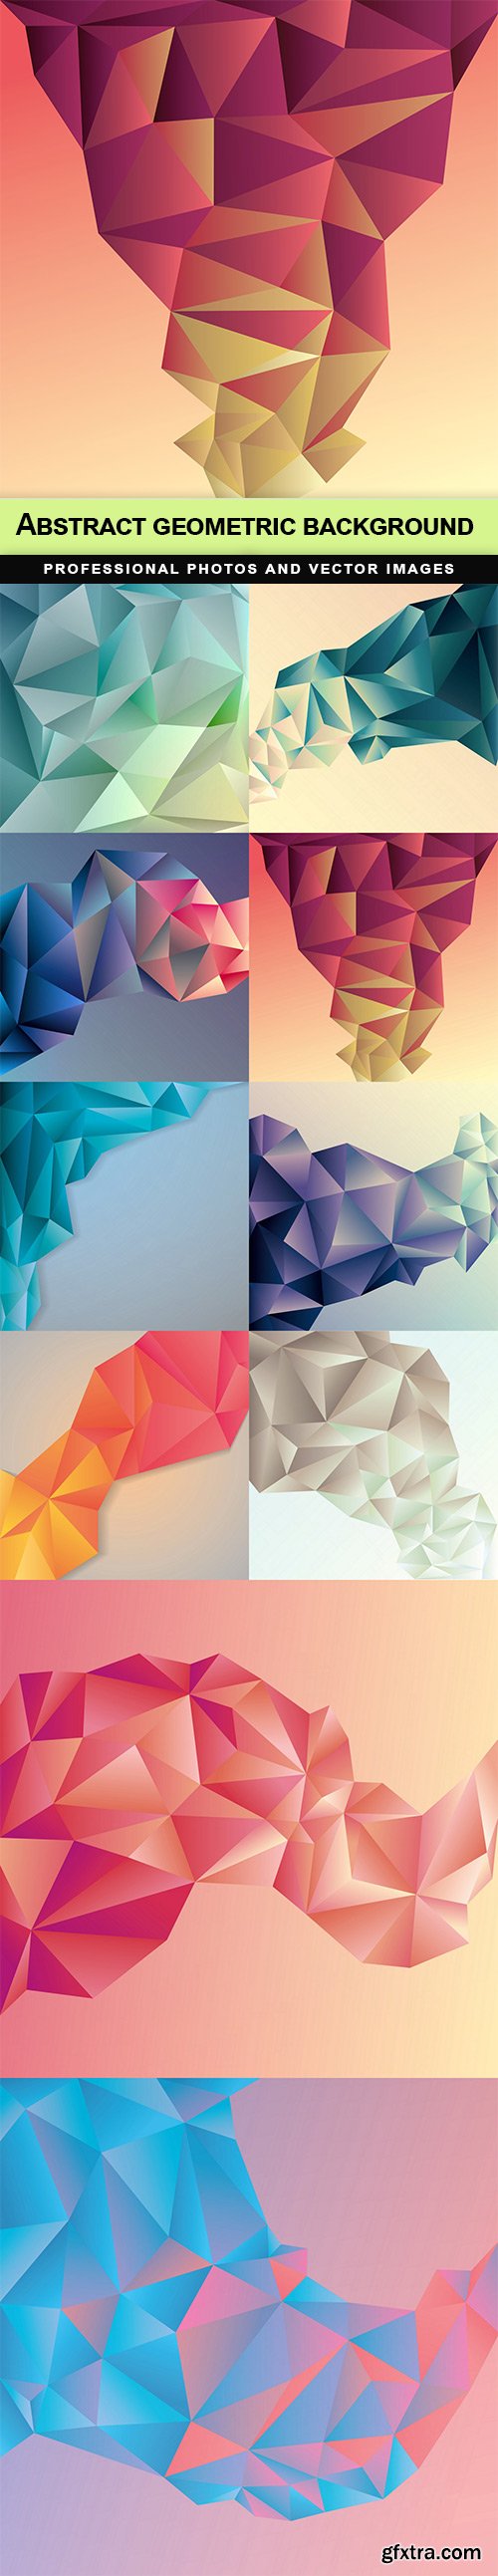 Abstract geometric background - 10 EPS